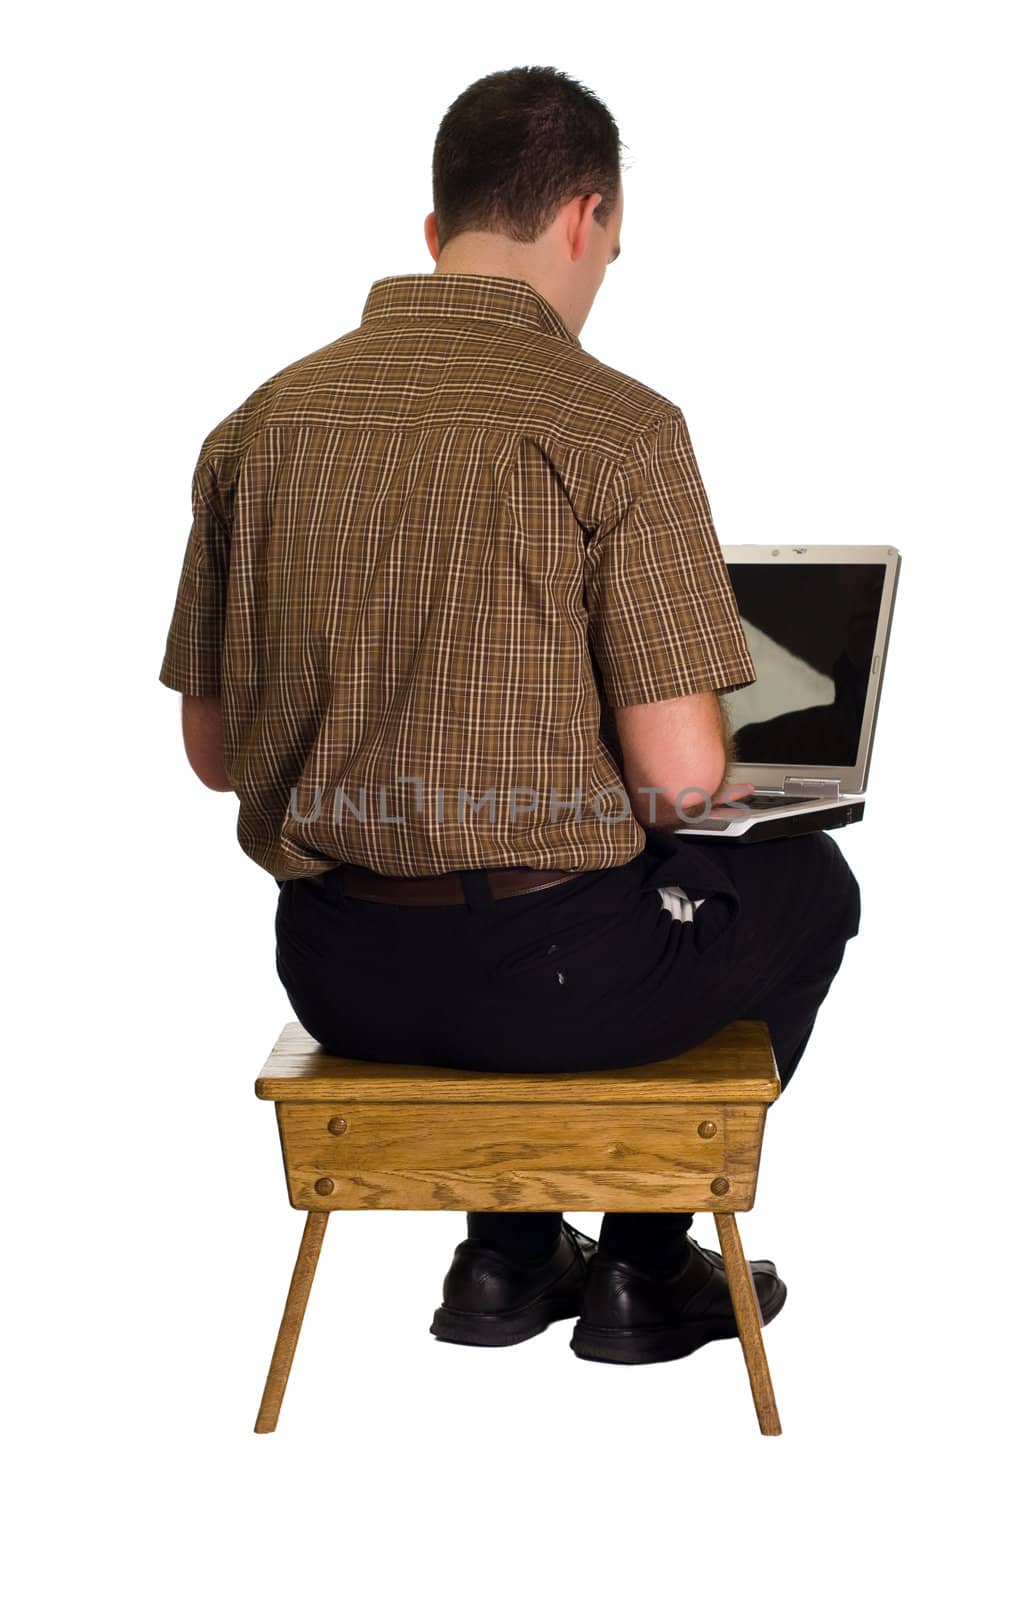 A man sitting on a wooden stool and working on his laptop computer, isolated against a white background